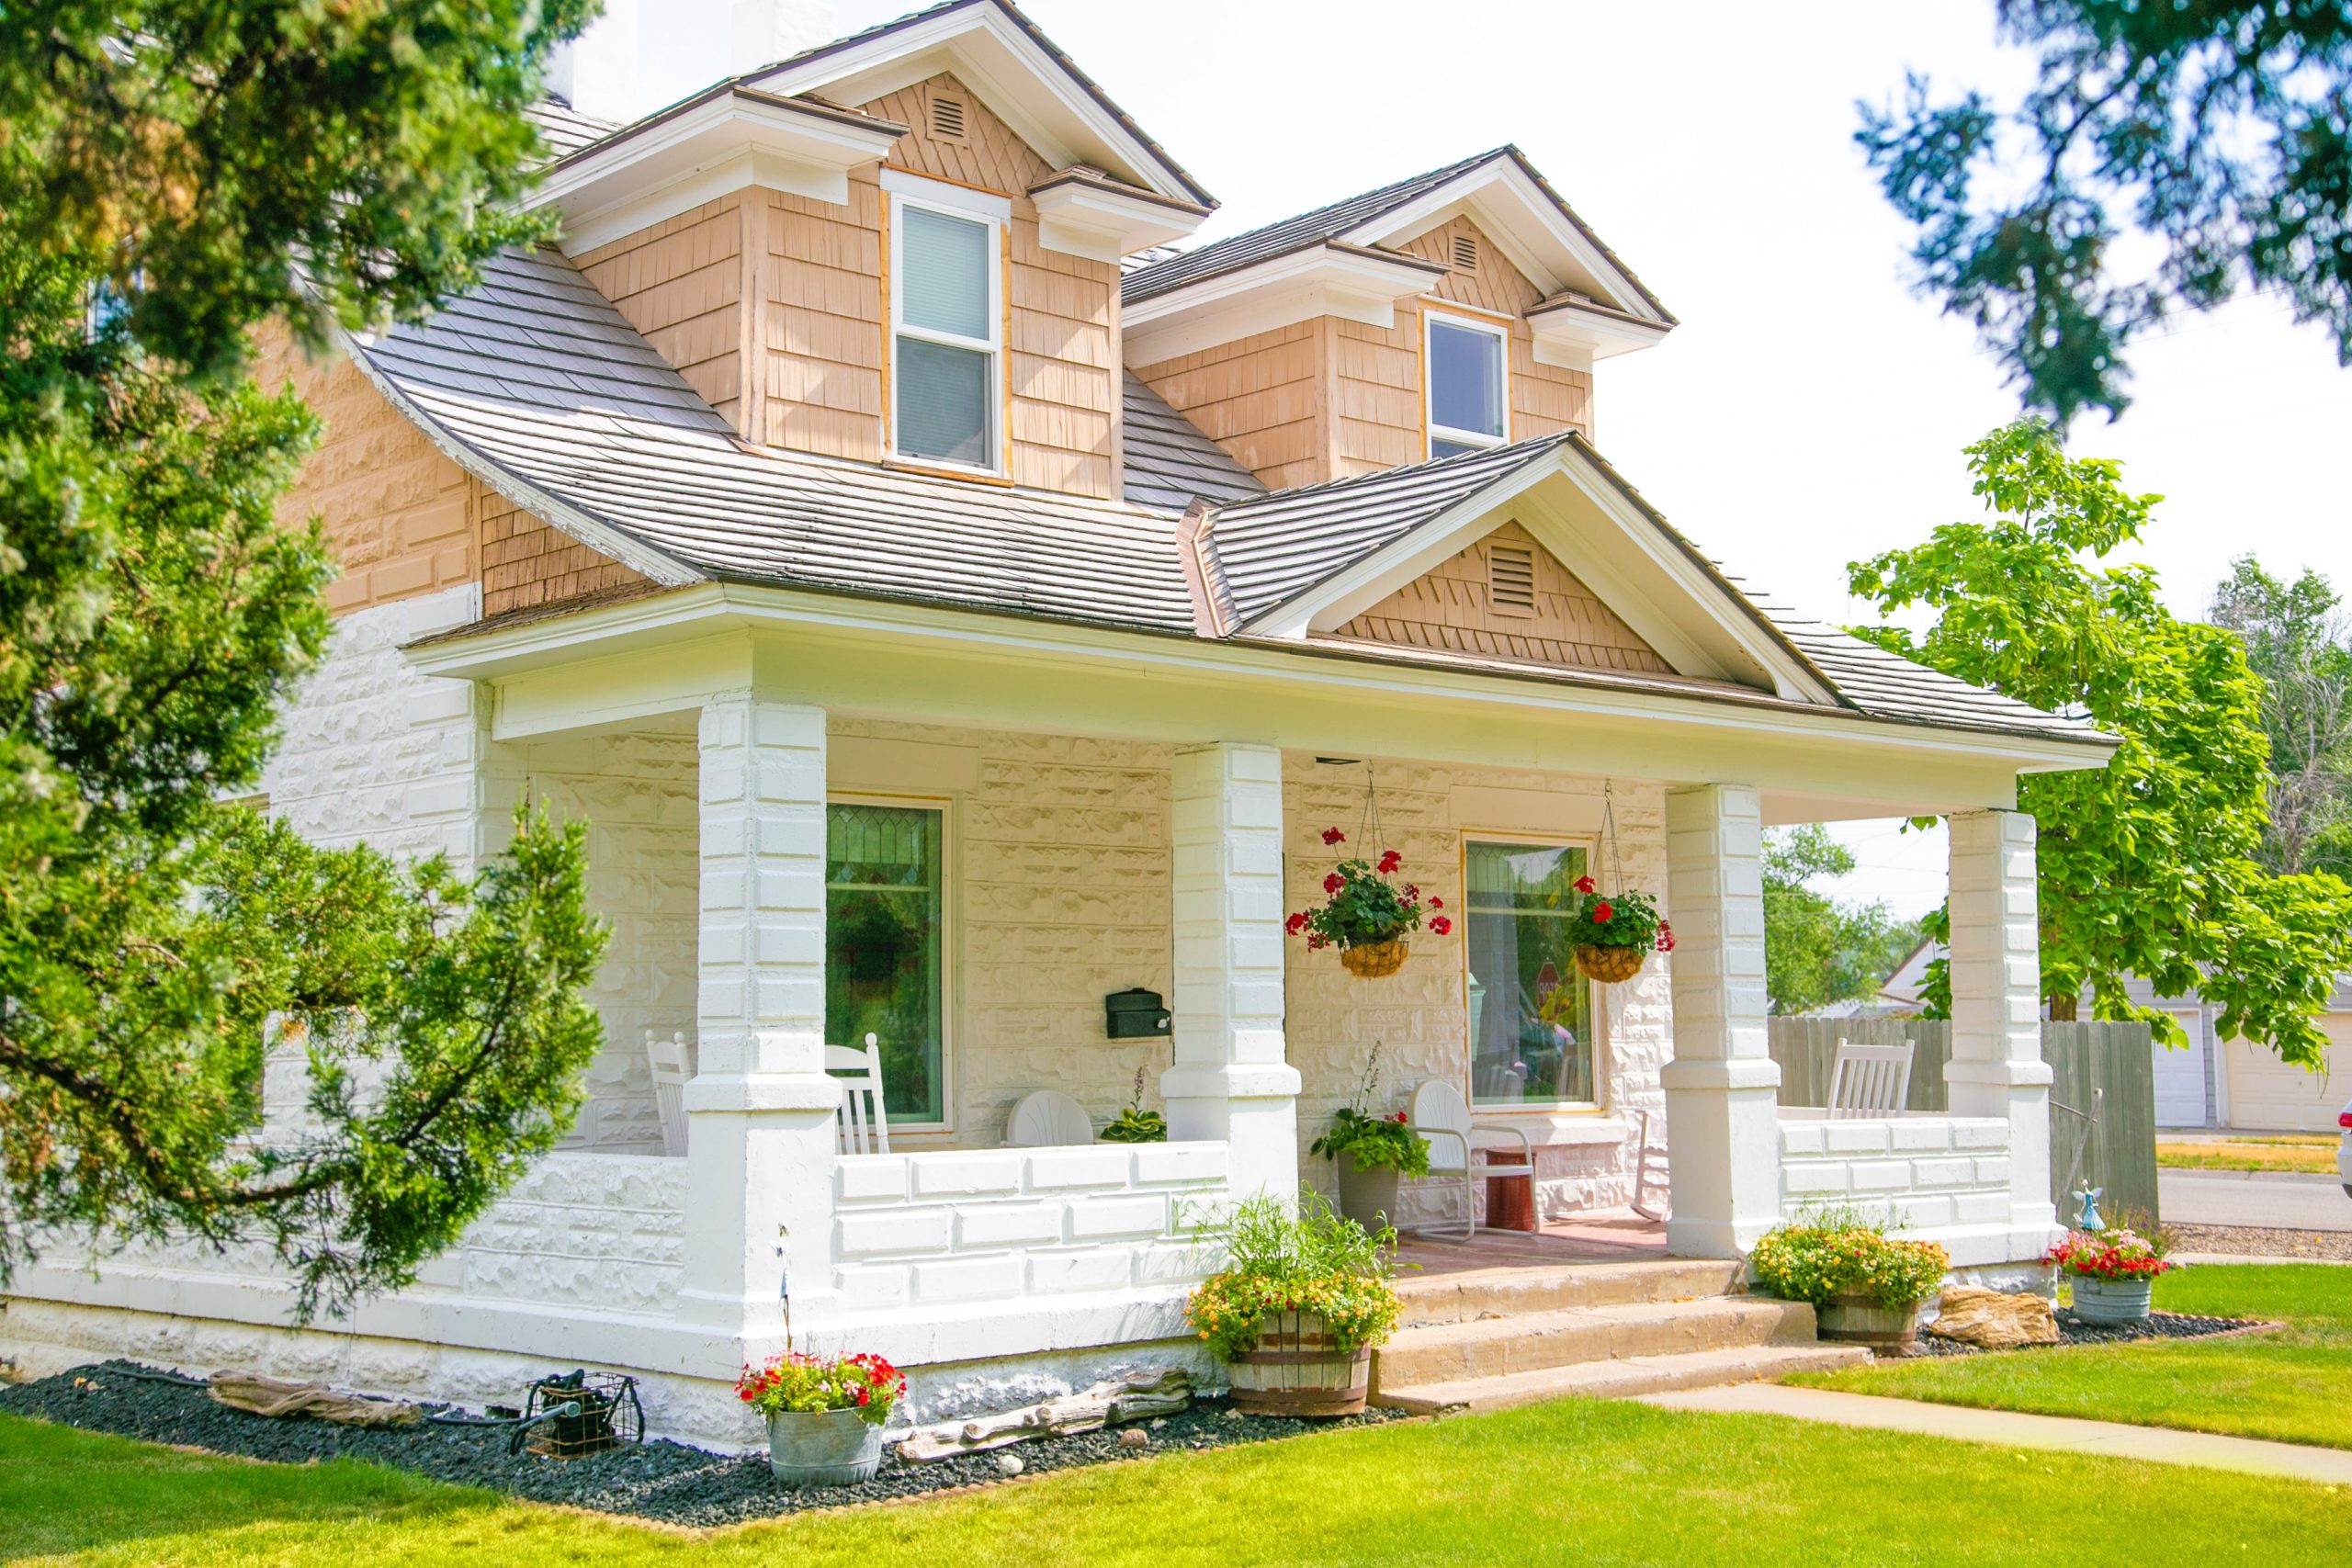 How To Add Curb Appeal When Selling A House